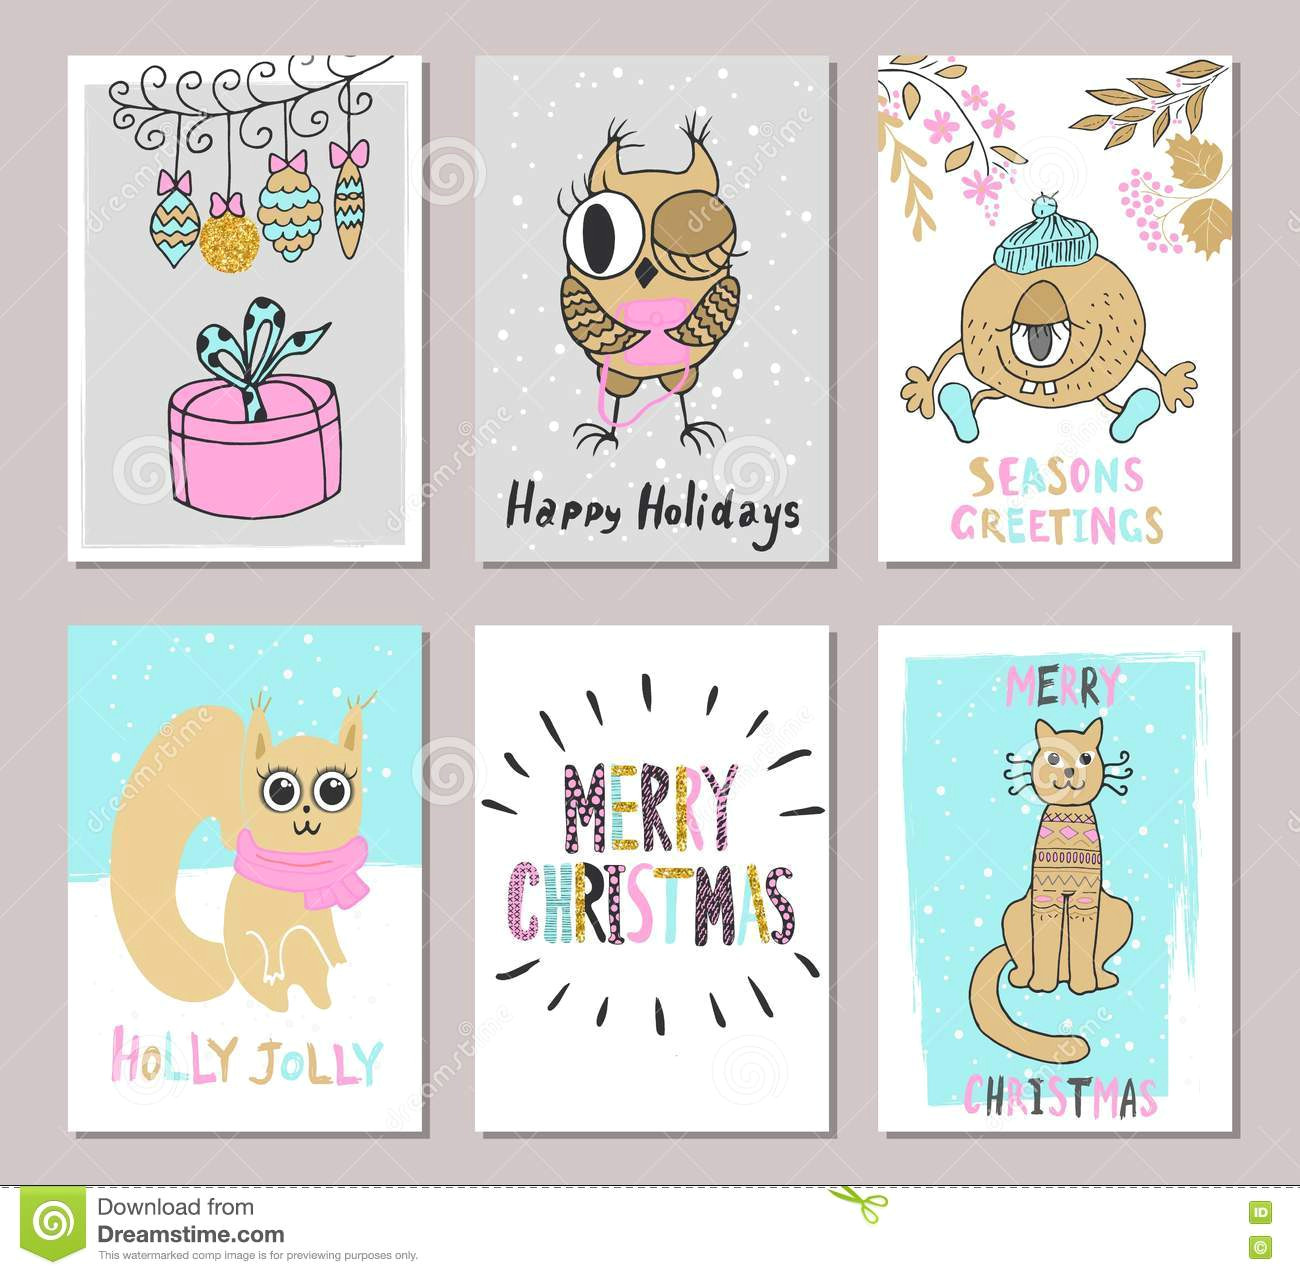 merry christmas greeting card set with cute cat squirrel owl gift and other elements cute hand drawn holiday cards and invitations